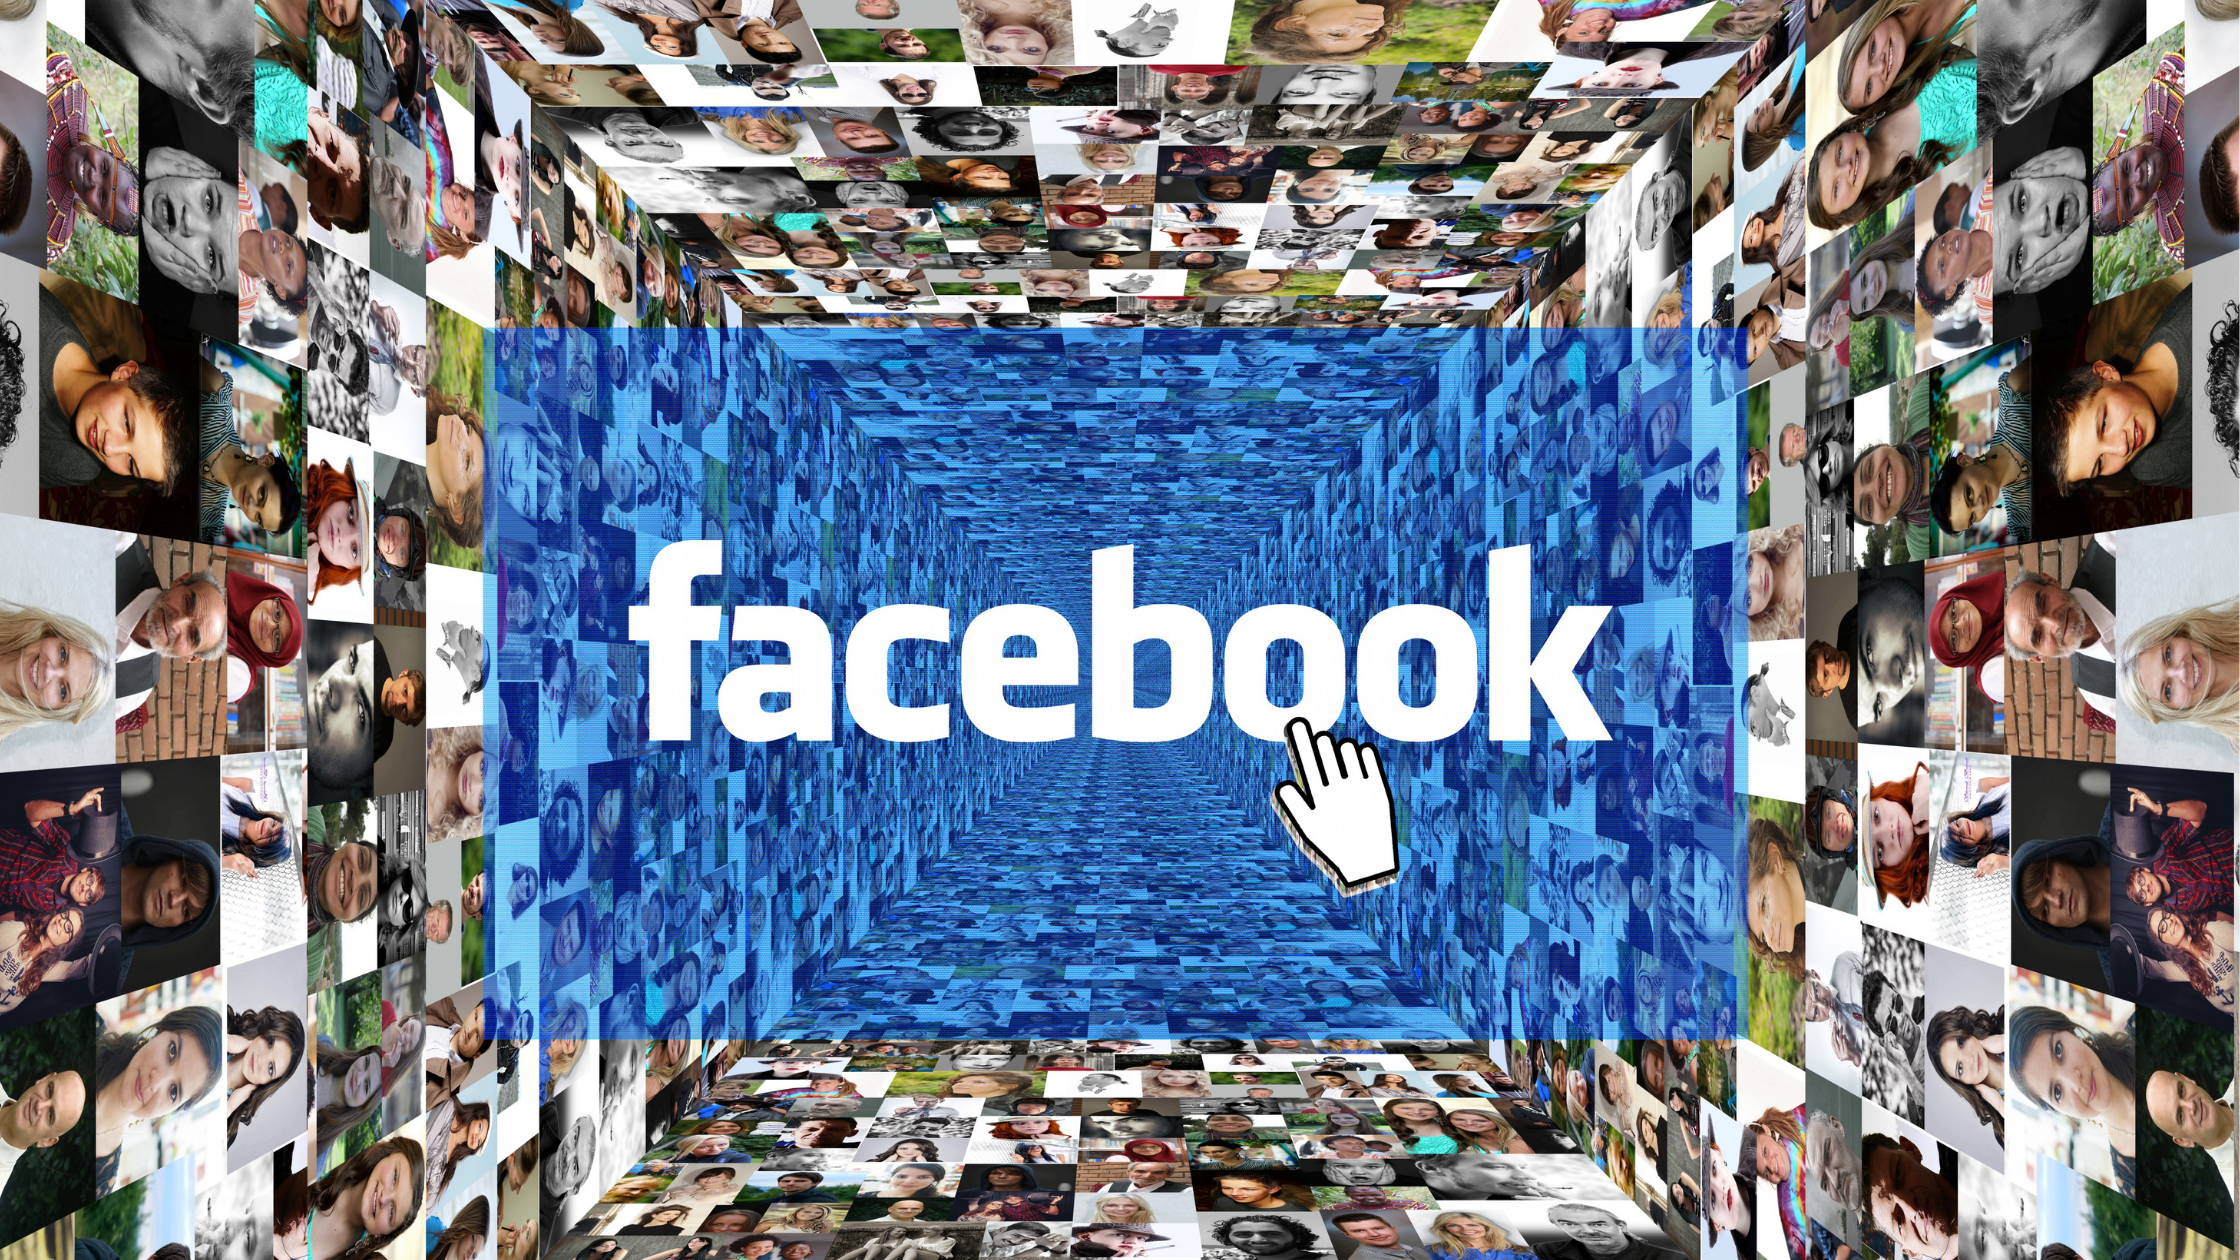 What Are the Advantages and Disadvantages of Facebook?